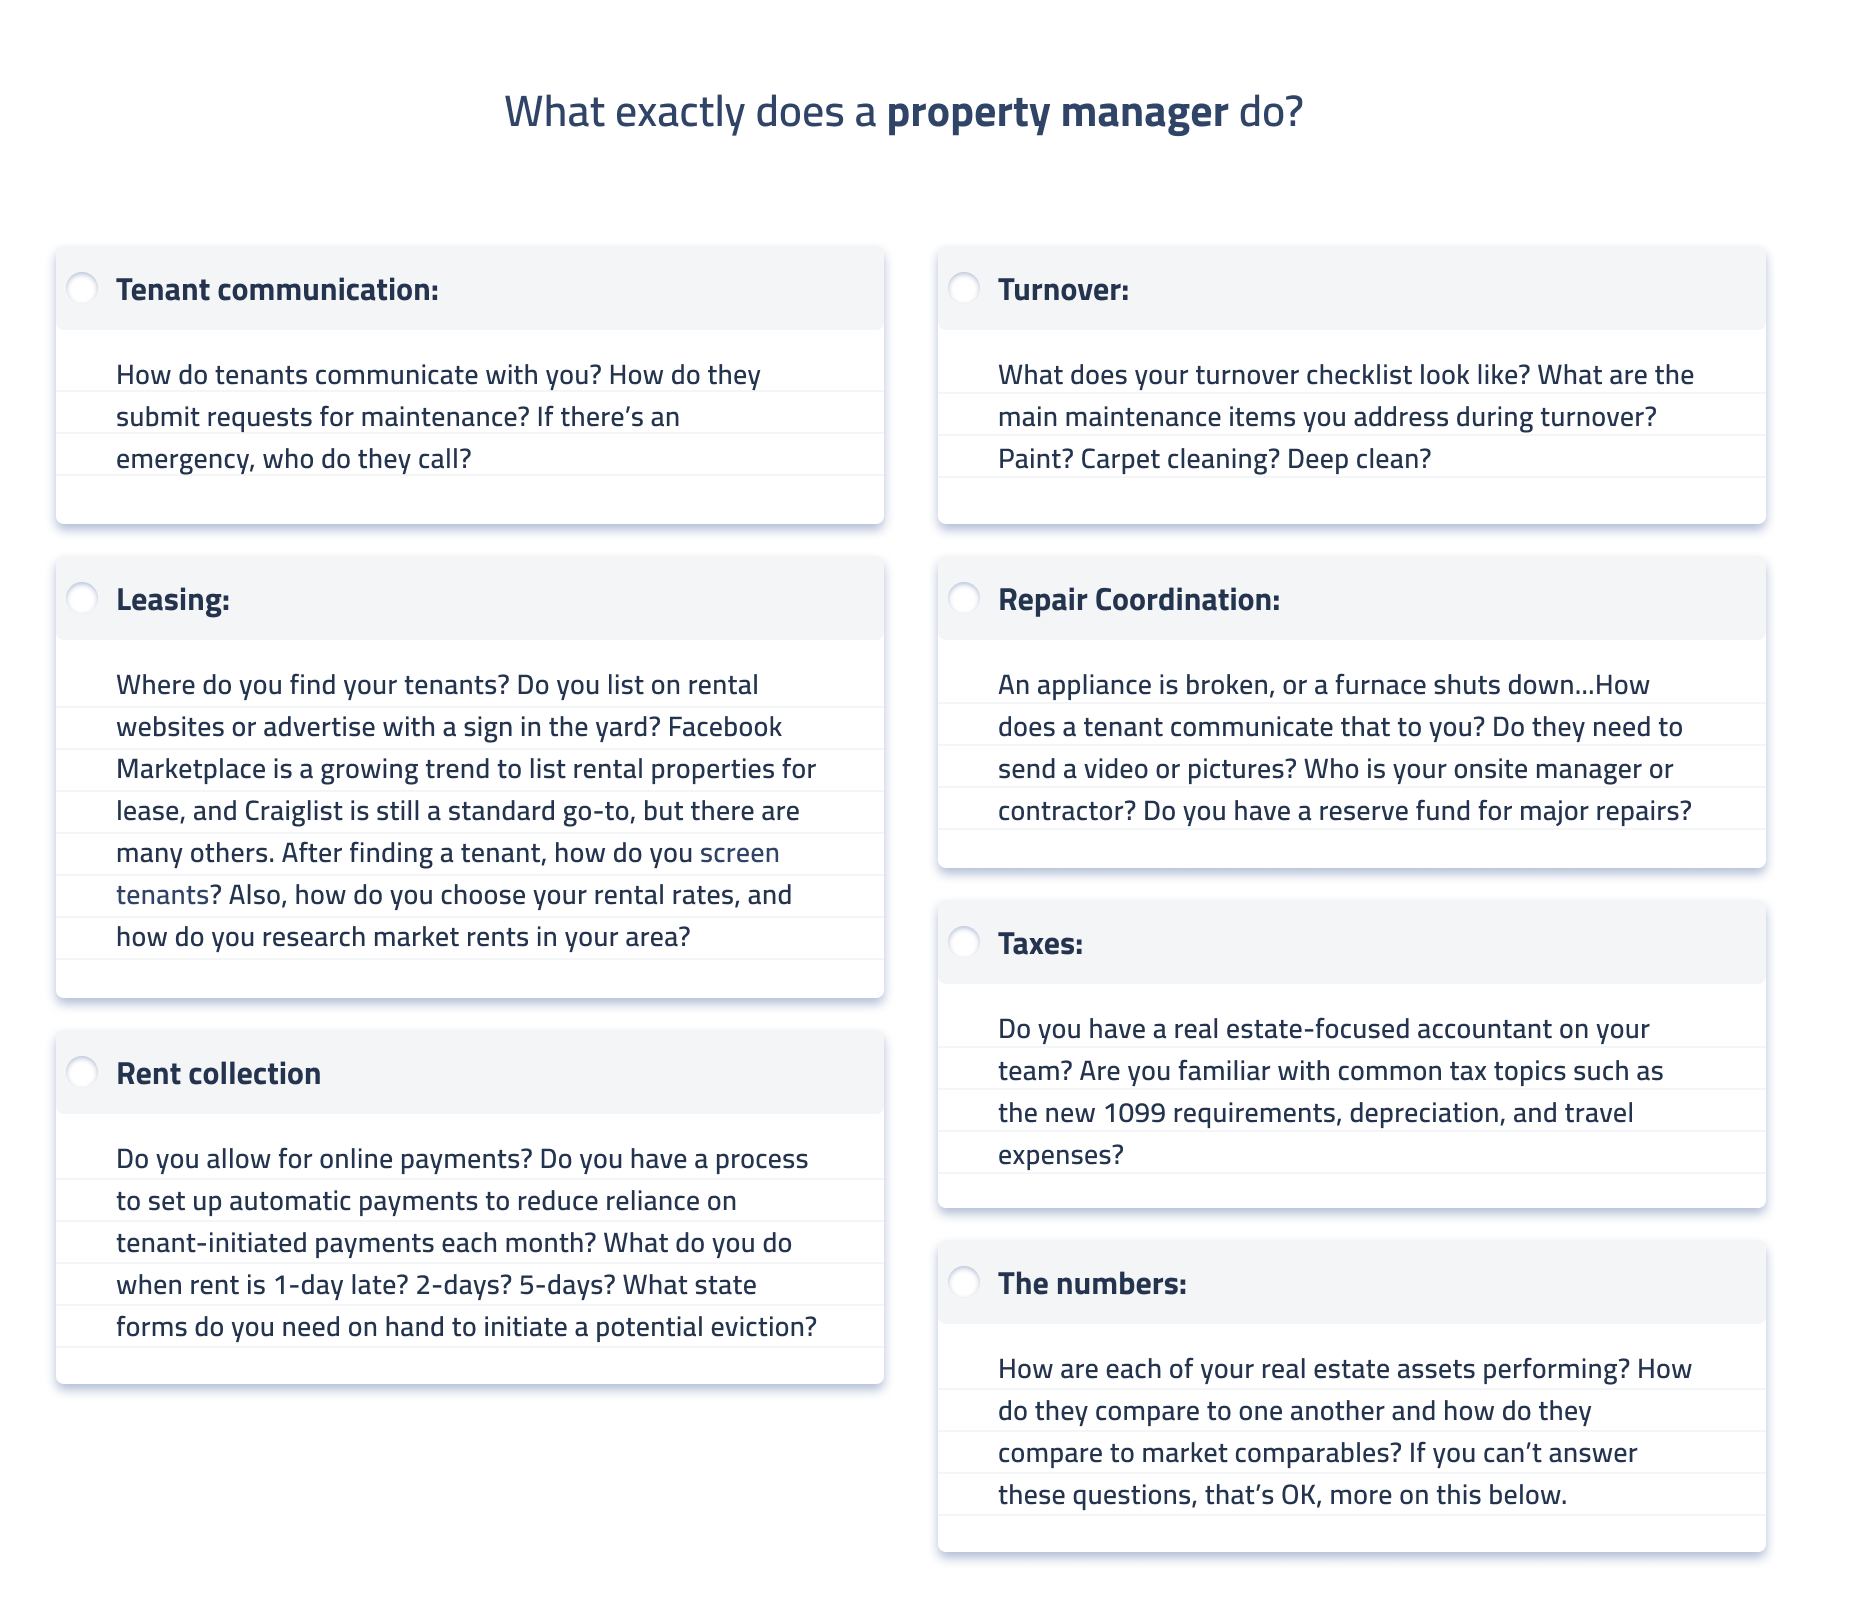 What do property managers do?